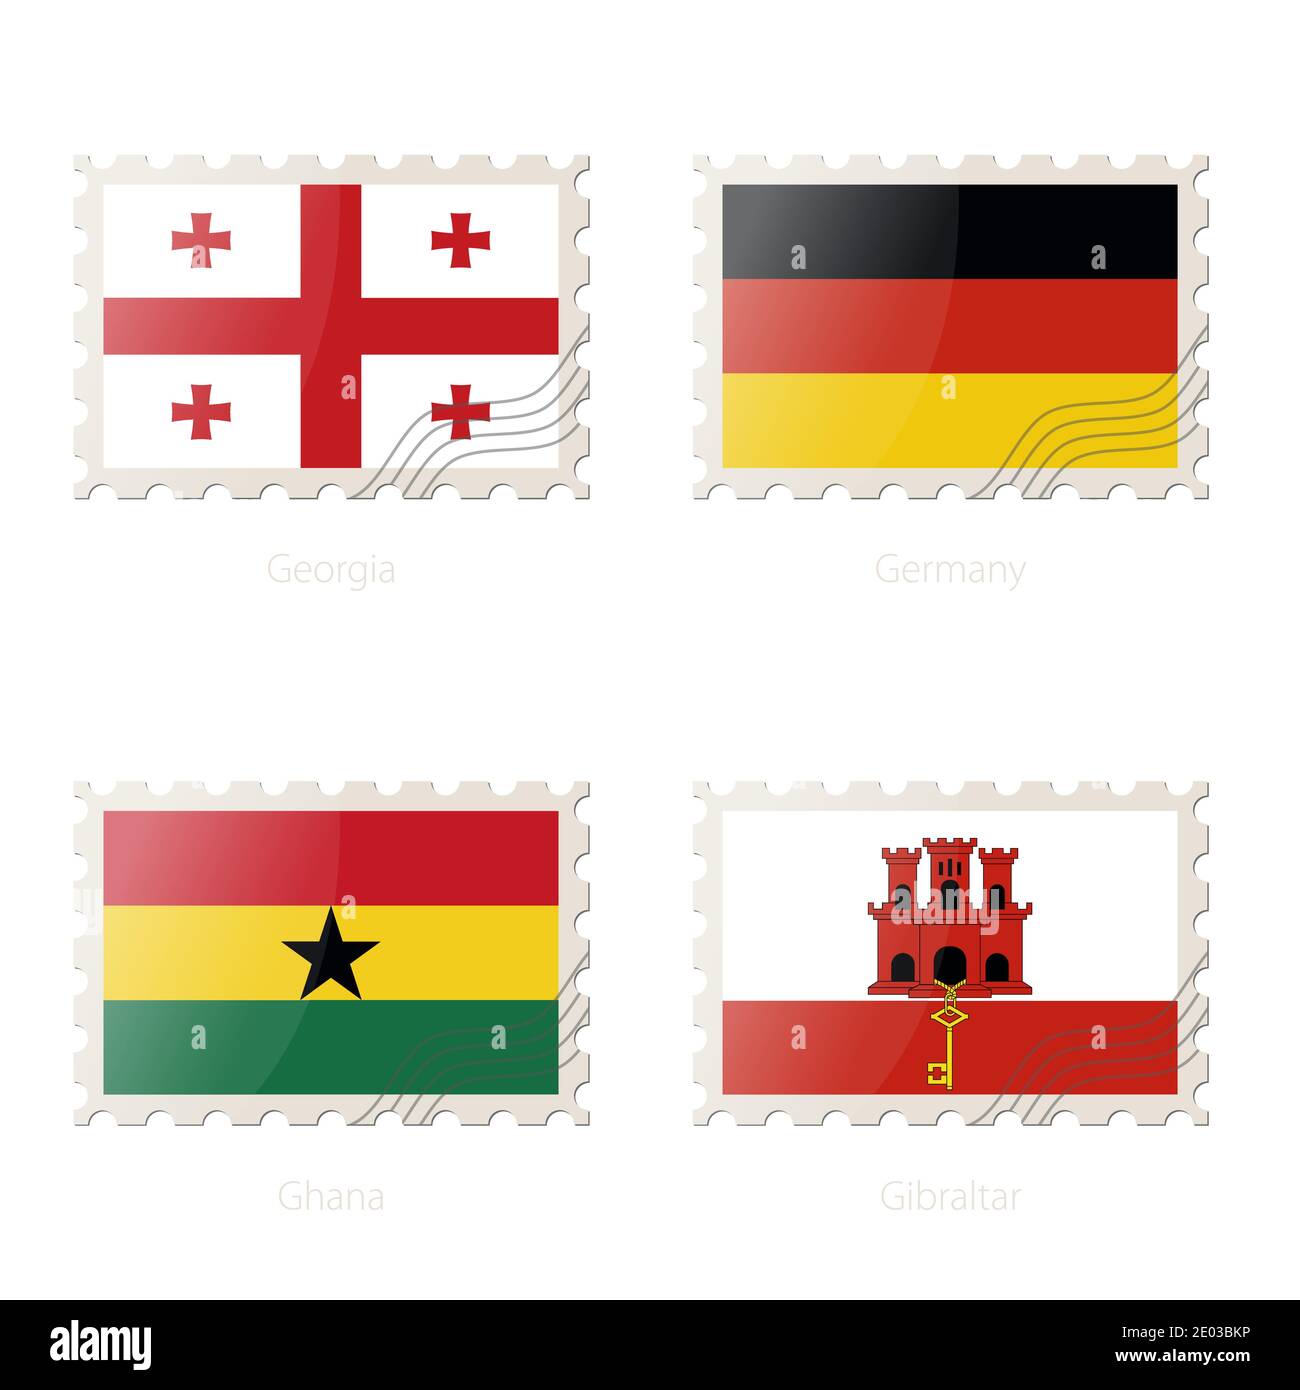 Postage stamp with the image of Georgia, Germany, Ghana, Gibraltar flag. Ghana, Gibraltar, Georgia, Germany Flag Postage on white background with shad Stock Vector